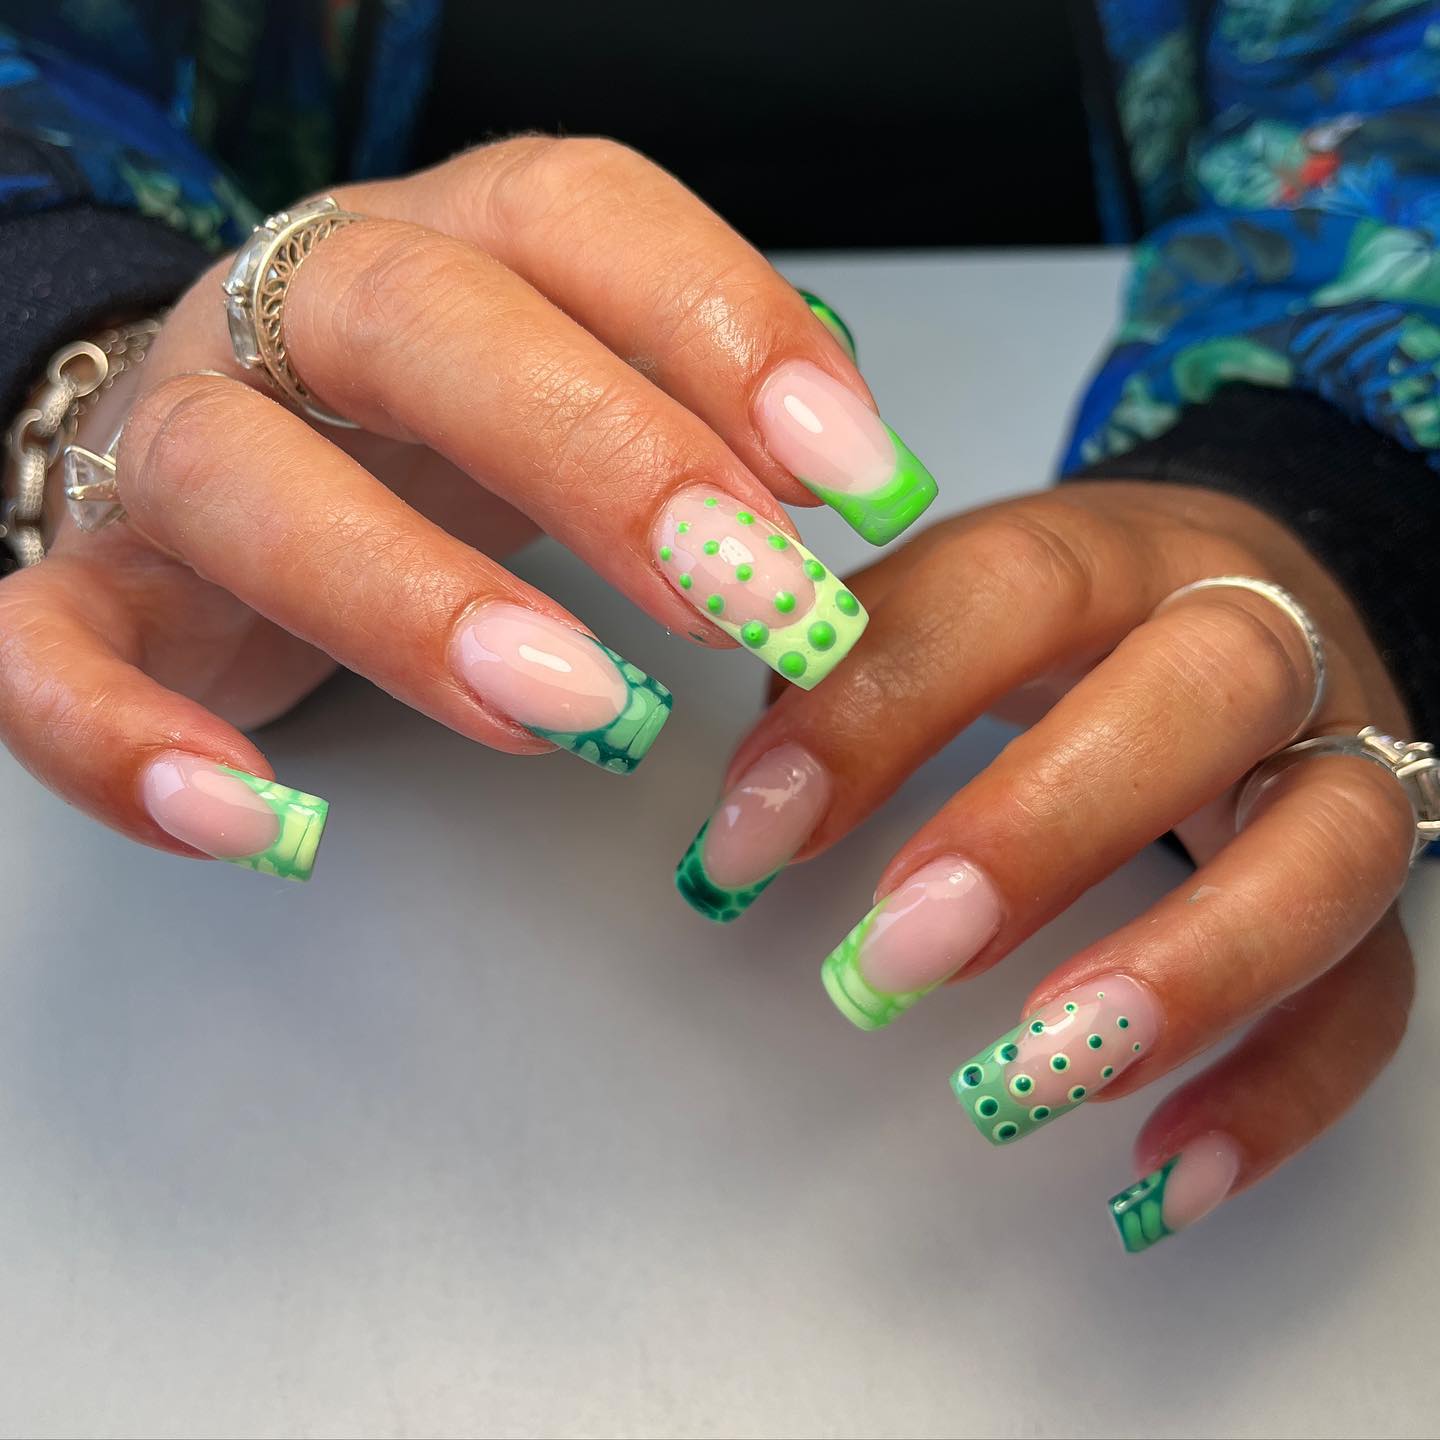 Some dots and lines are enough to give a different look to your green french tips. It is a perfect choice for summer days.